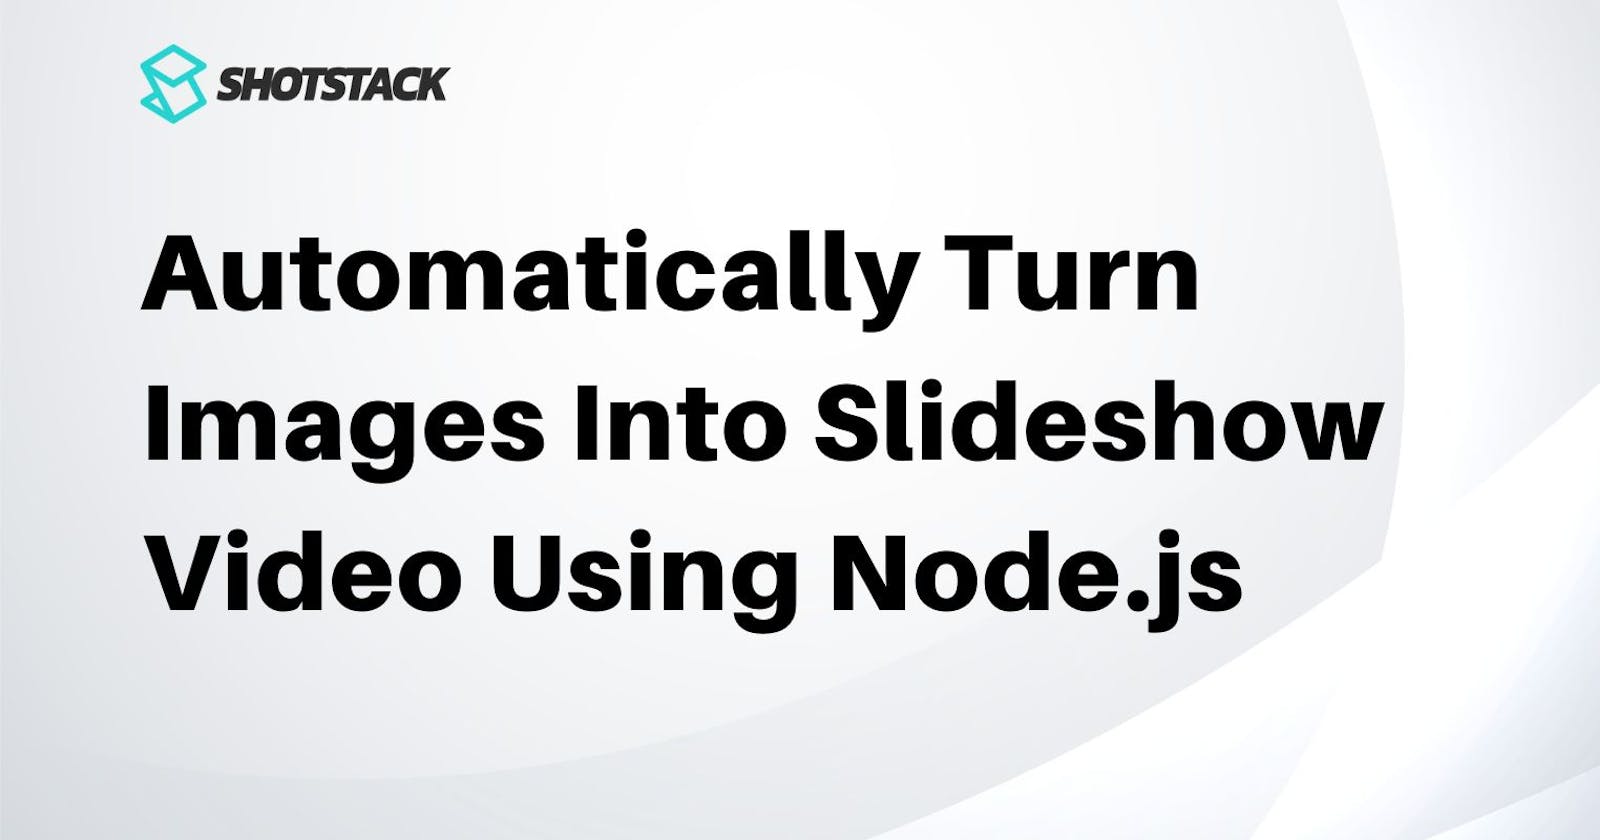 Automatically Turn Images Into Slideshow Video Using Node.js